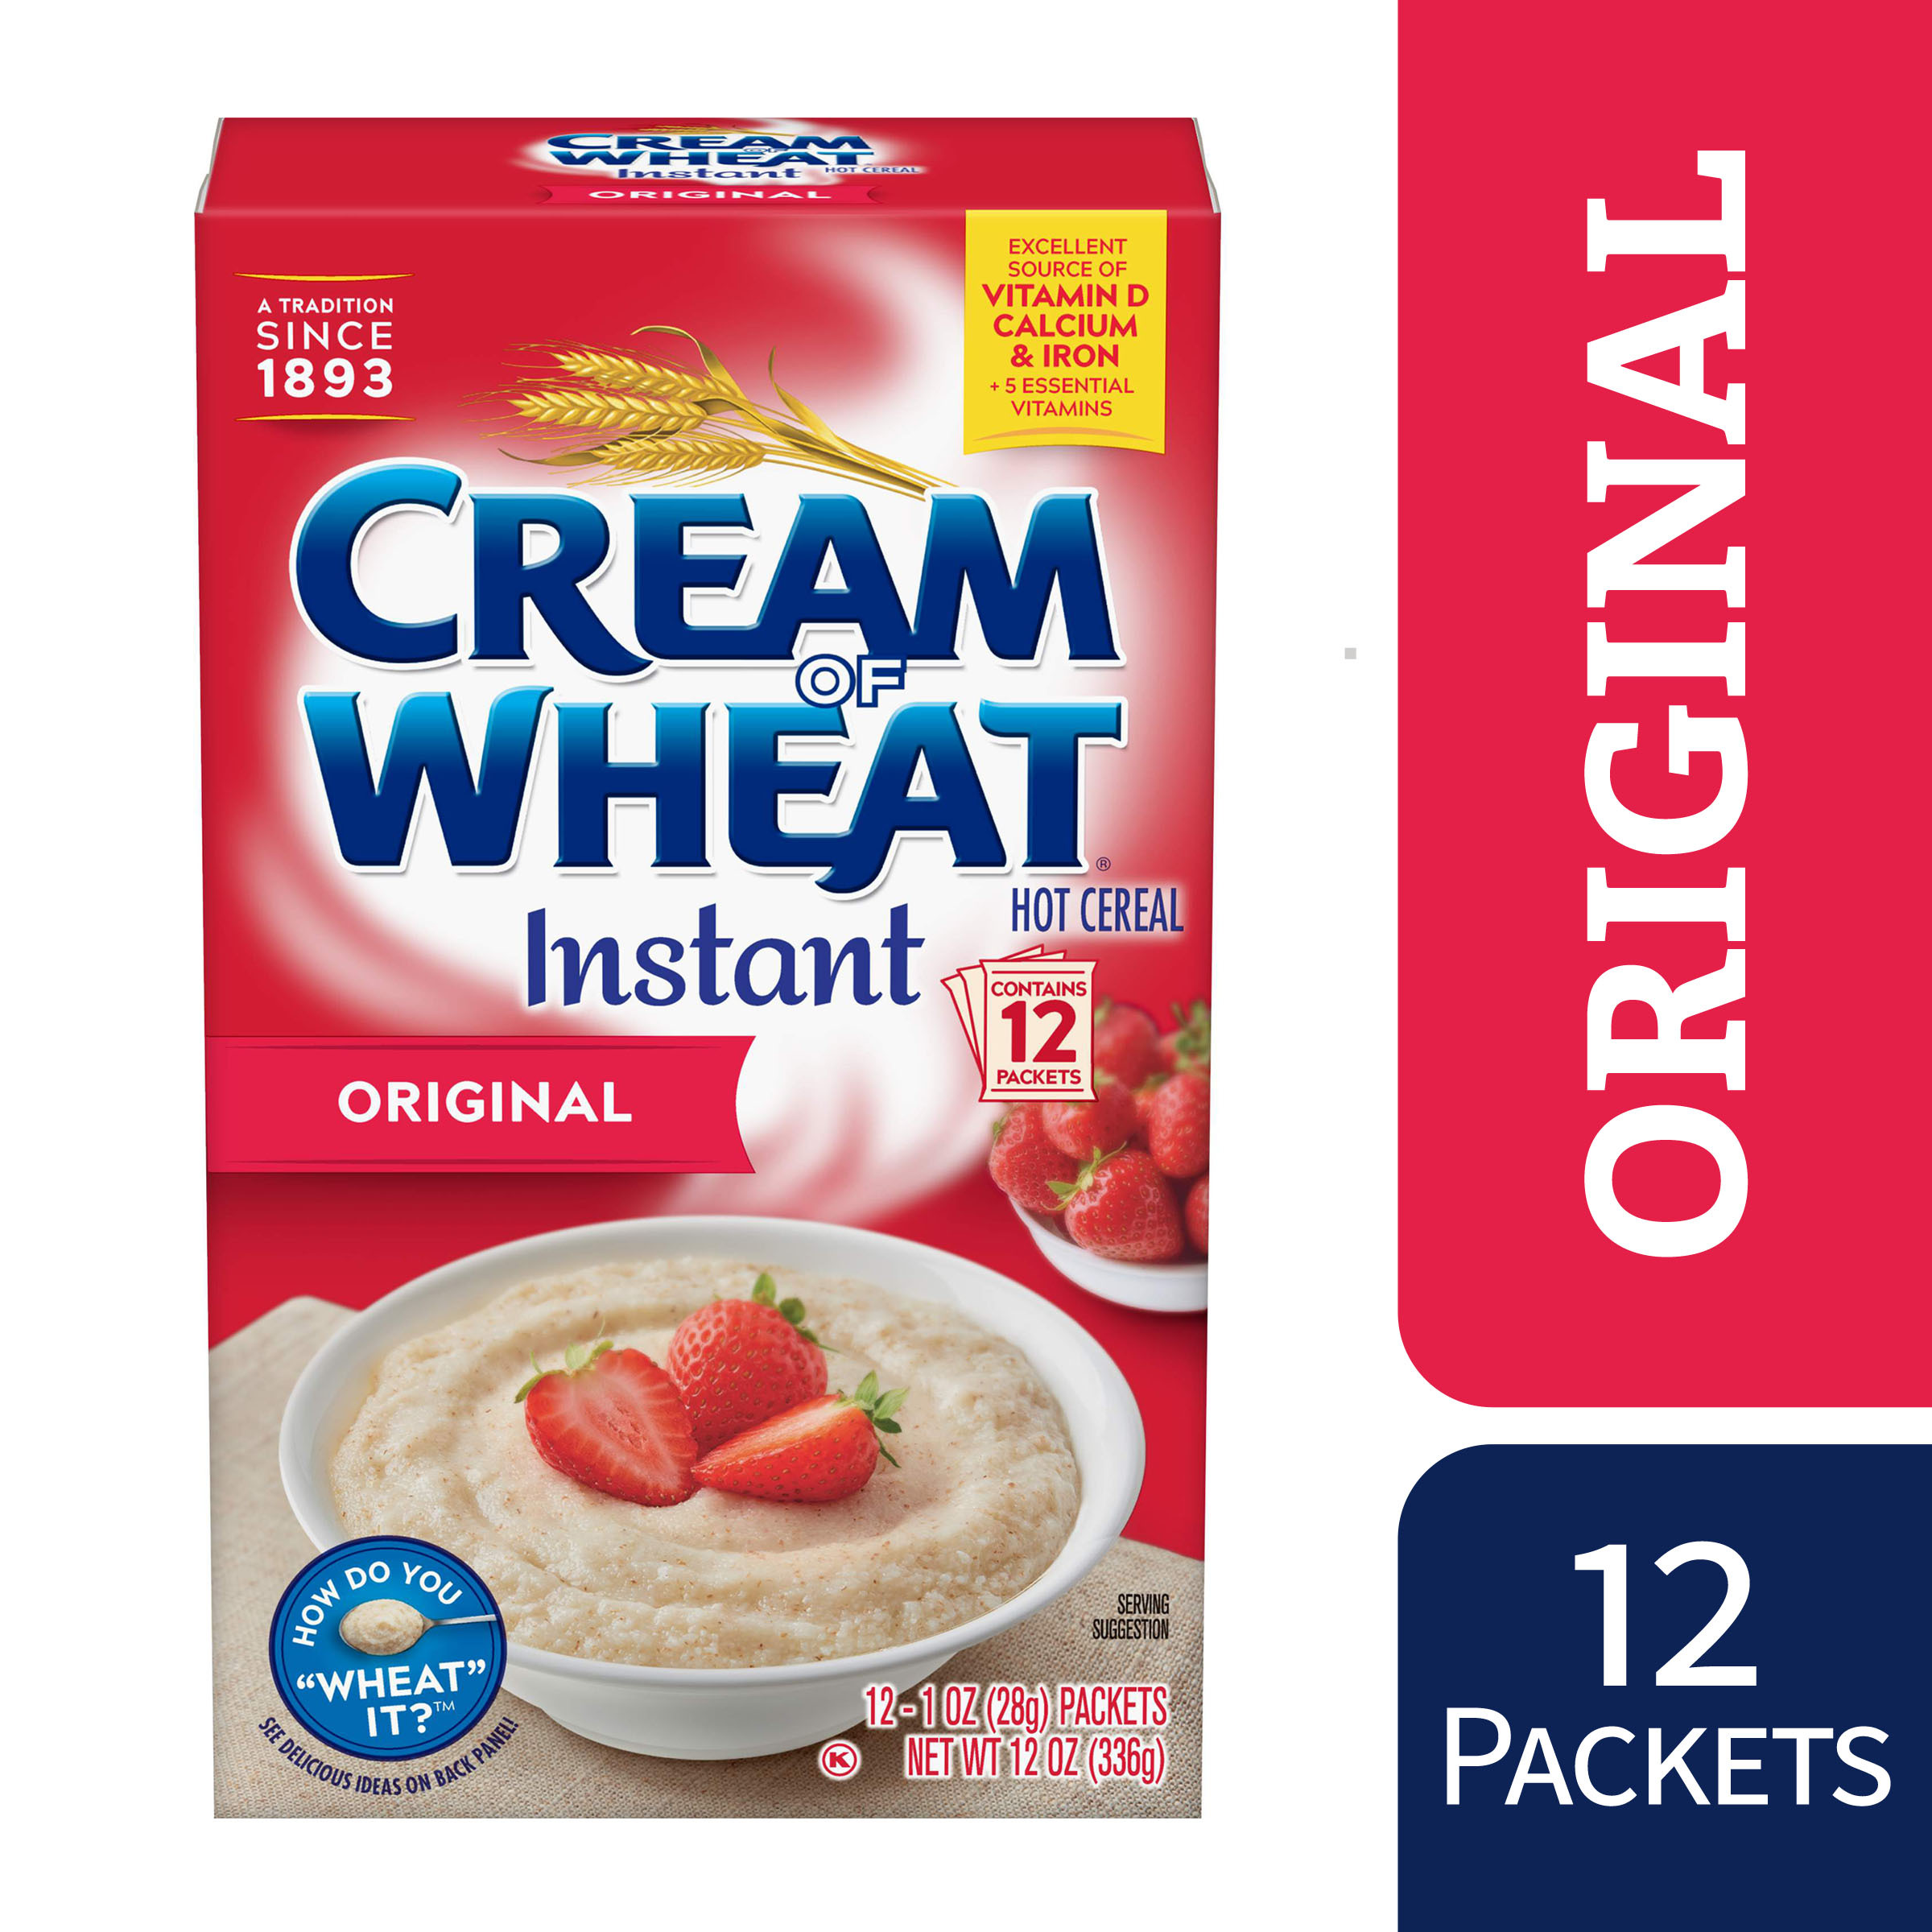 Cream of Wheat, Instant Hot Cereal, Original, 1 oz, 12 Packets - image 1 of 13